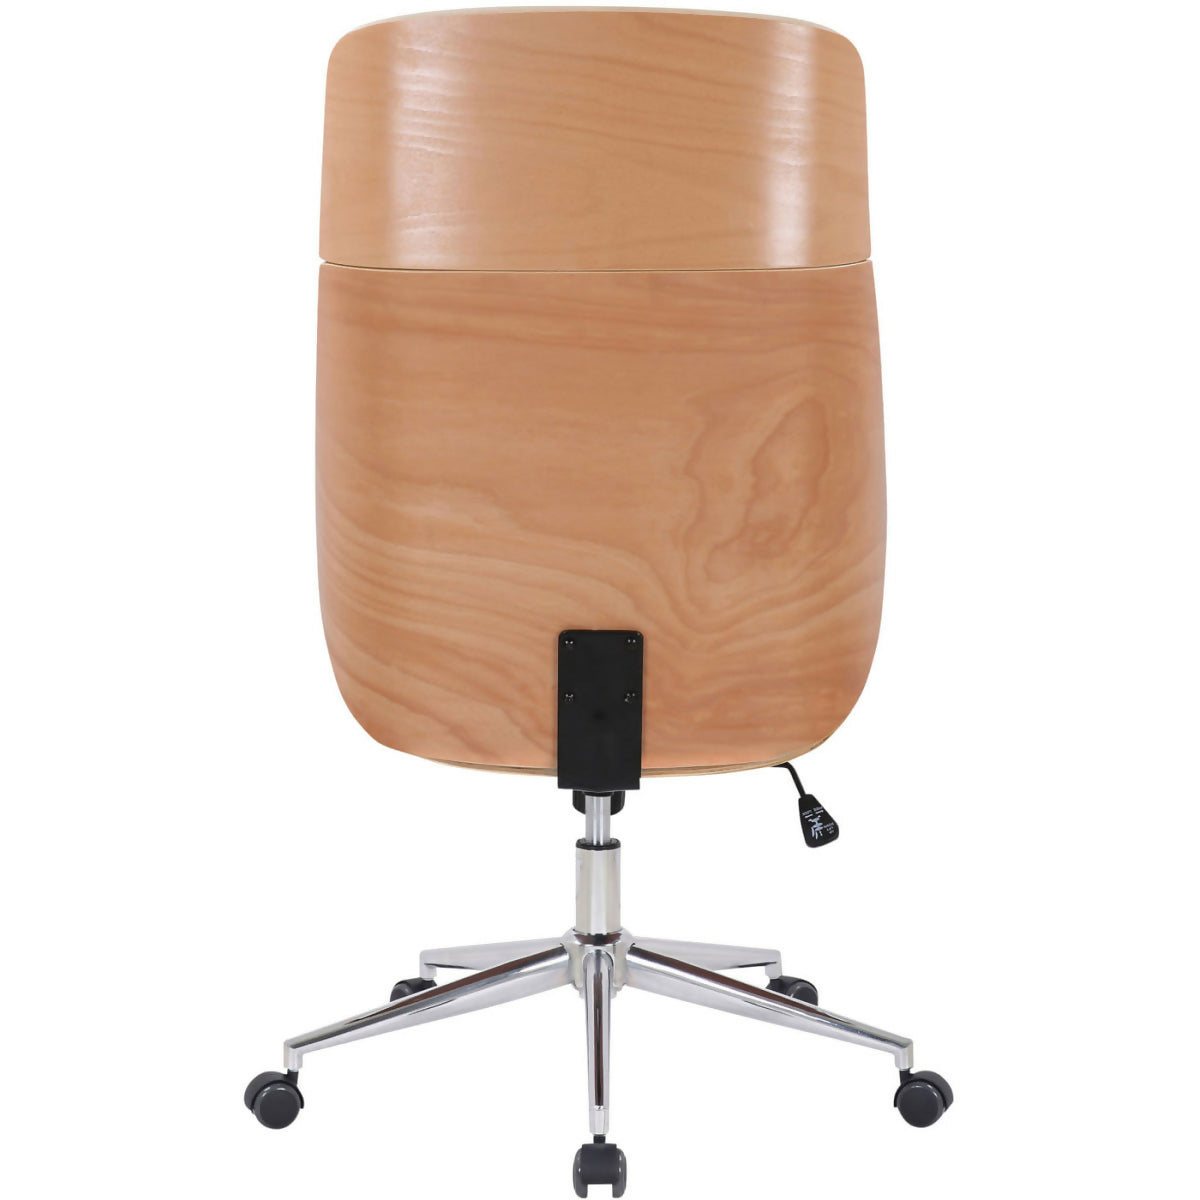 Varel office armchair - Natural wood - white